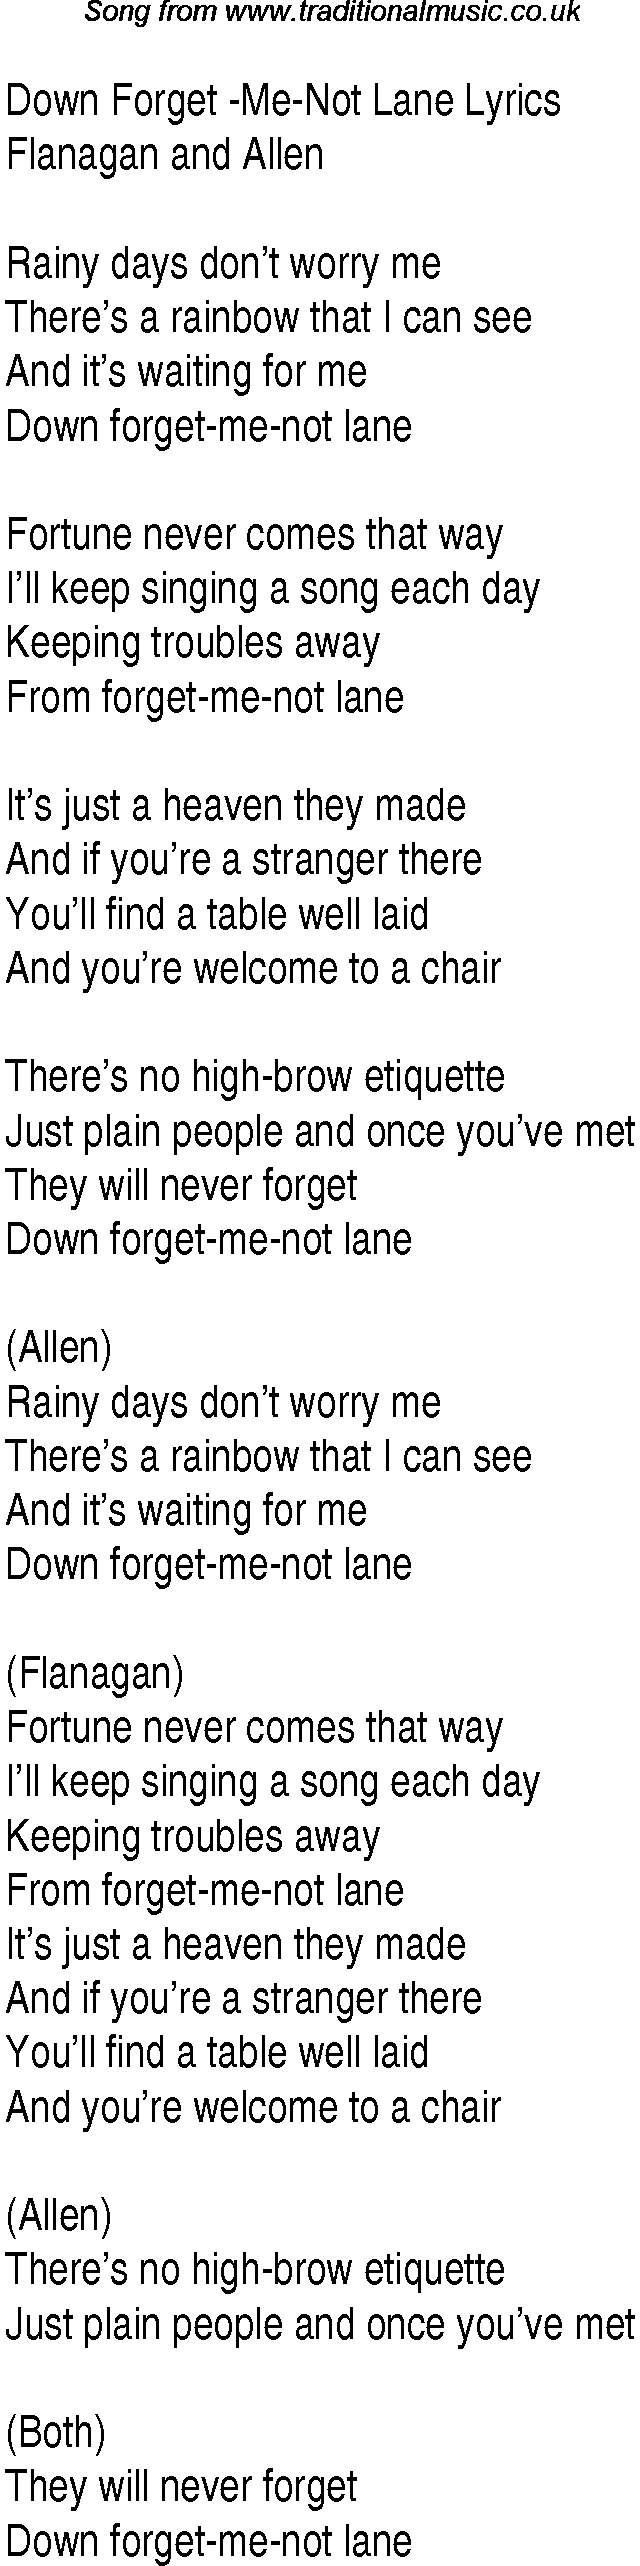 1940s Top Songs Lyrics For Down Forget Me Not Lane Flanagan Allen